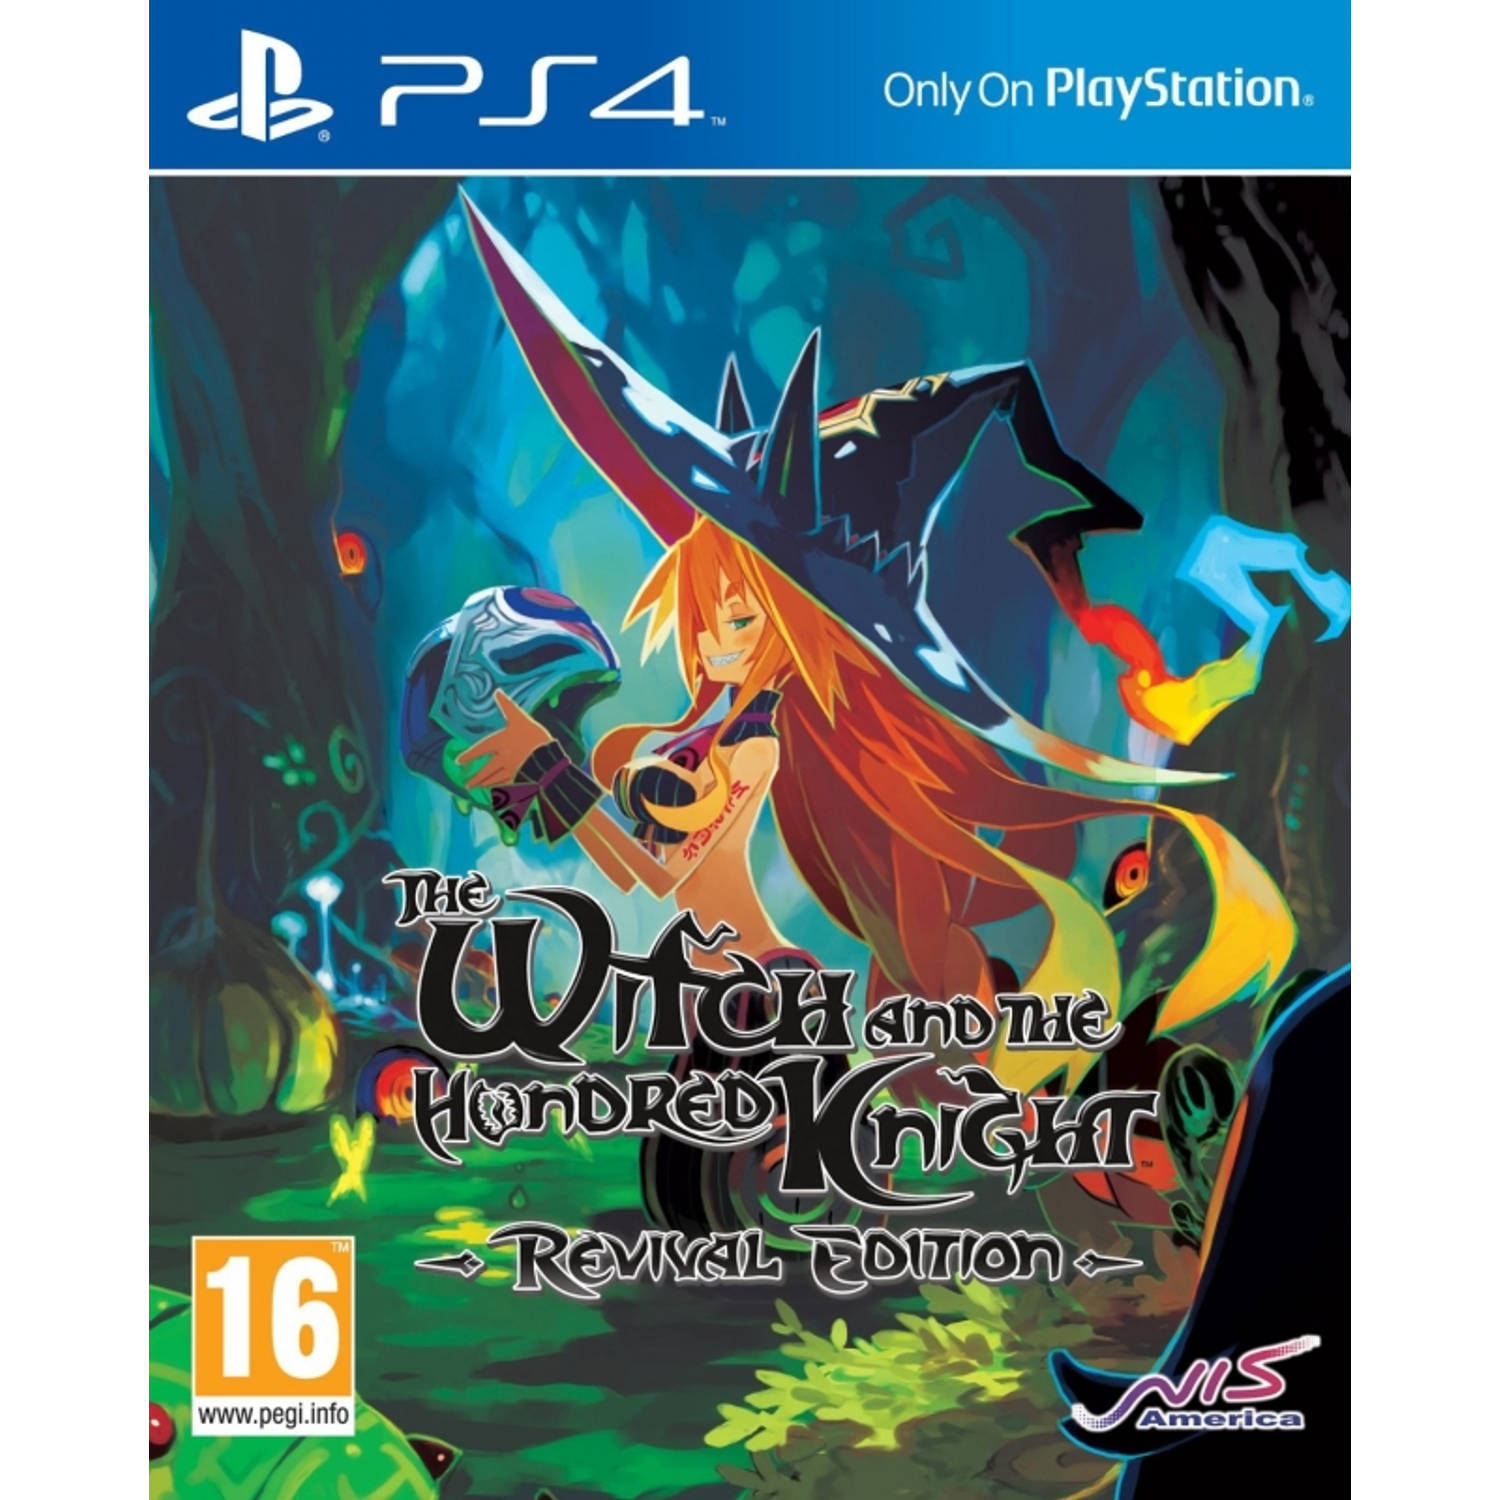 VideogamesNL the witch and the hundred knight revival edition PlayStation 4